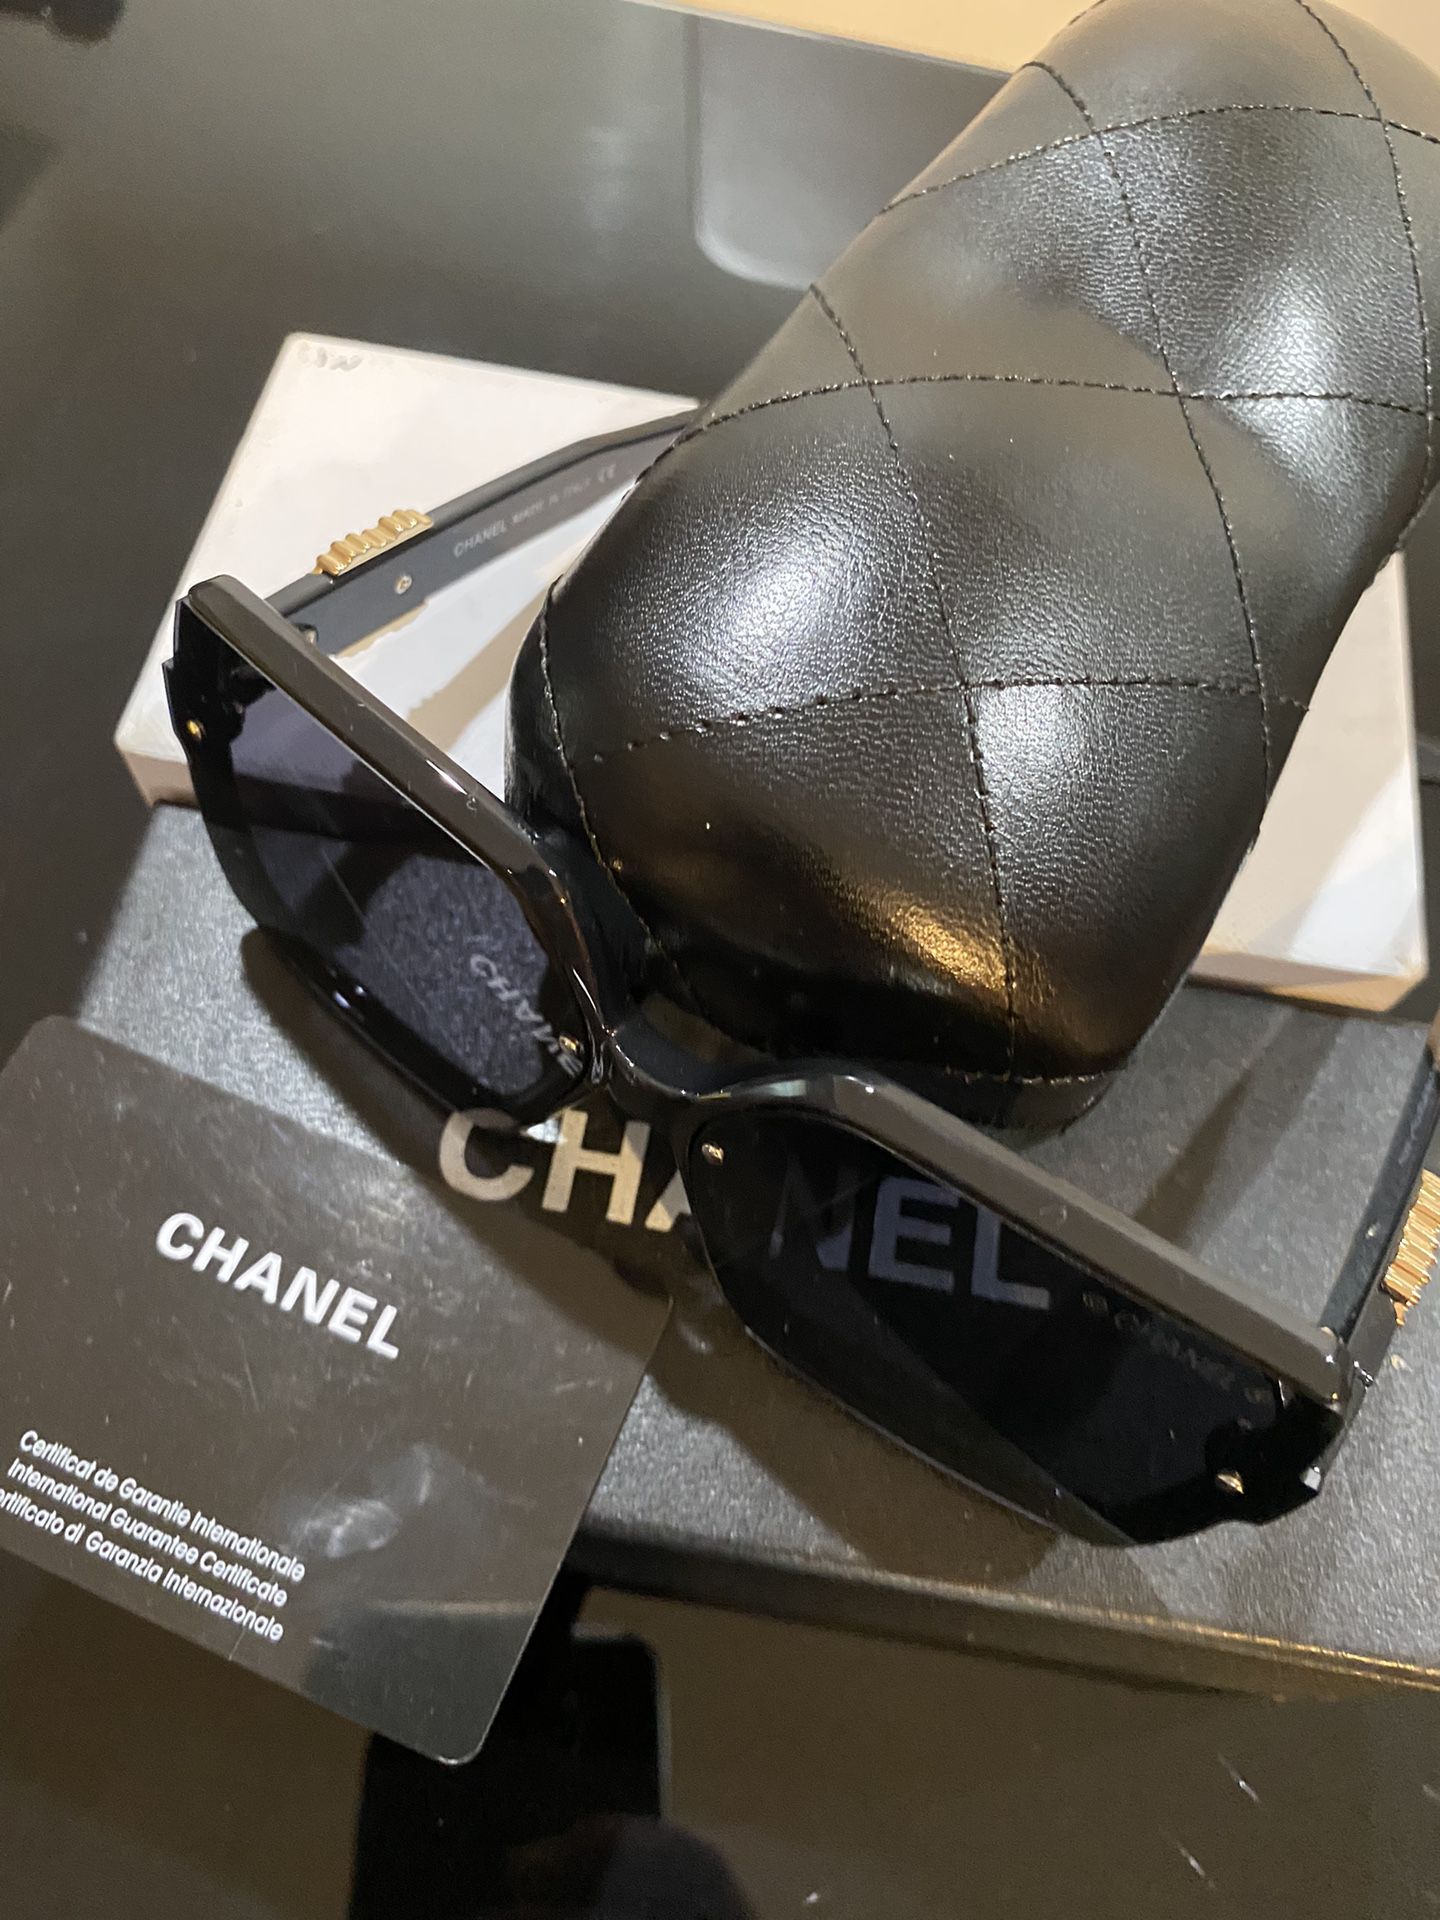 CHANEL for Sale in South Gate, CA - OfferUp